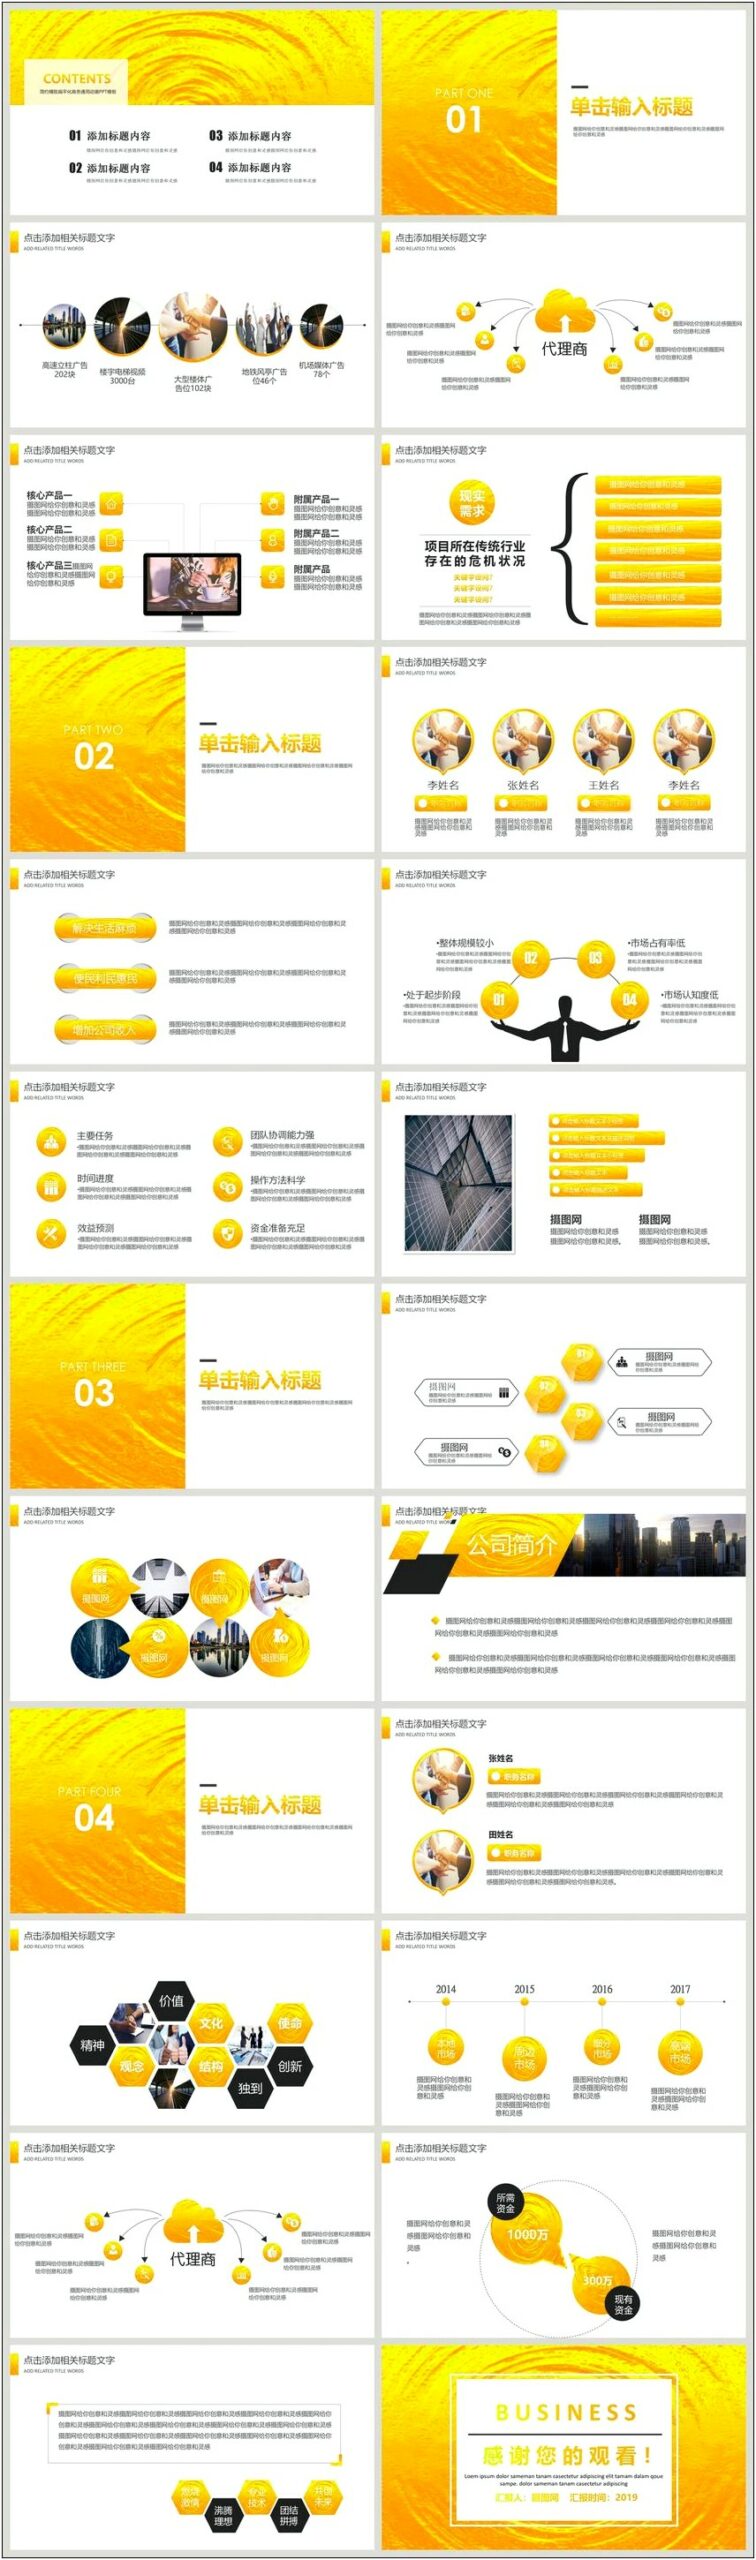 A Free Simple Business Plan Template